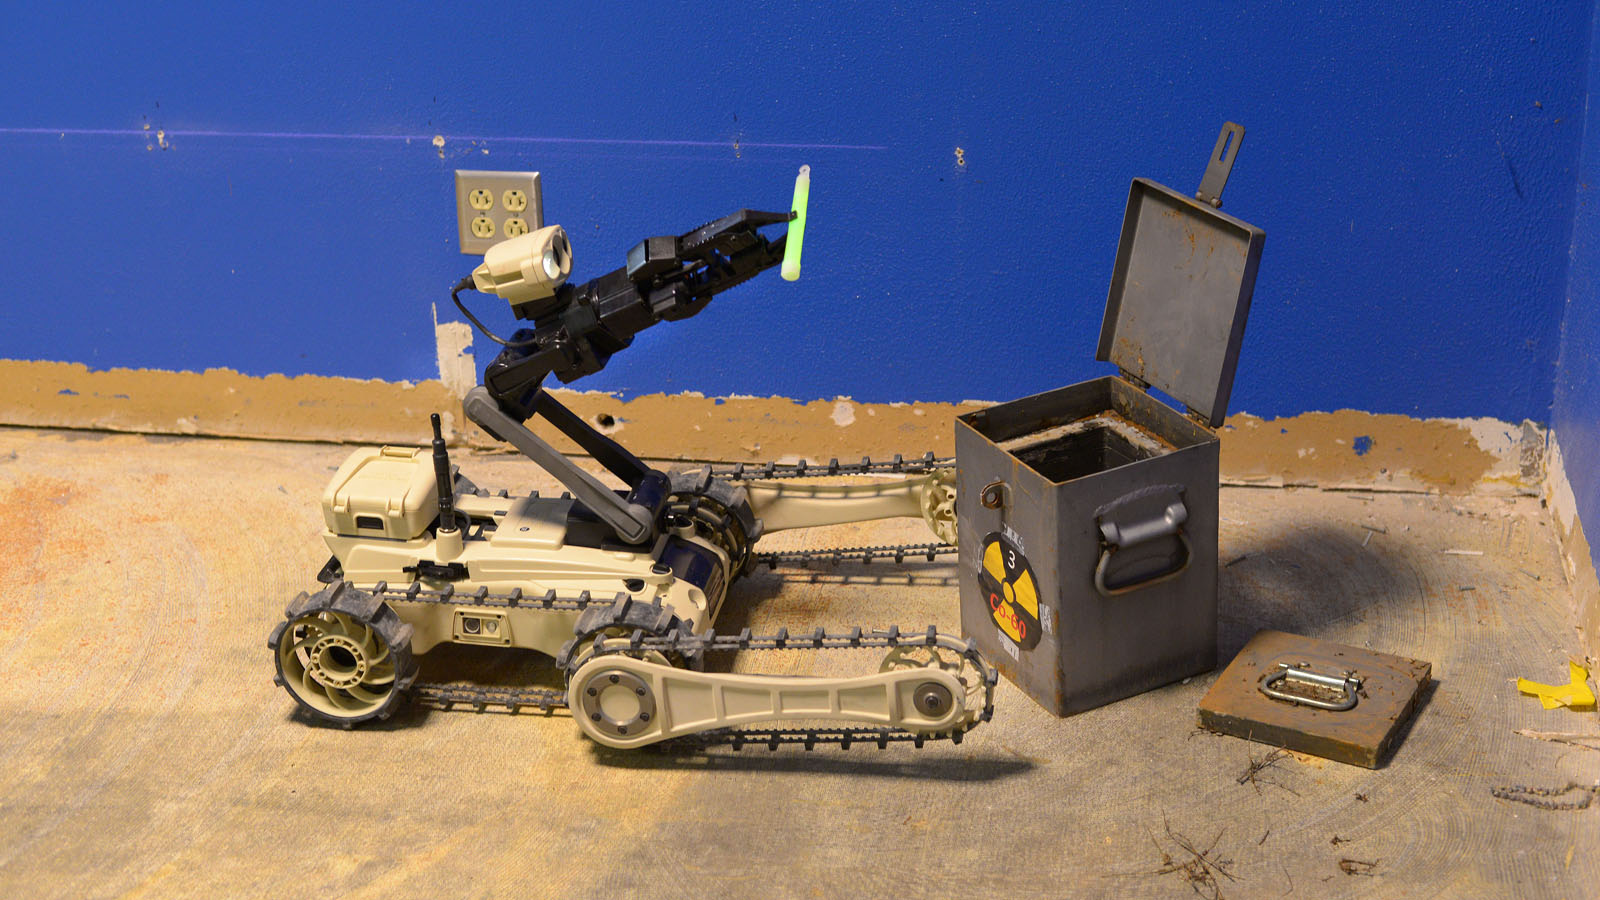 A Rodeo For Bomb Disposal Robots Looks Dangerous